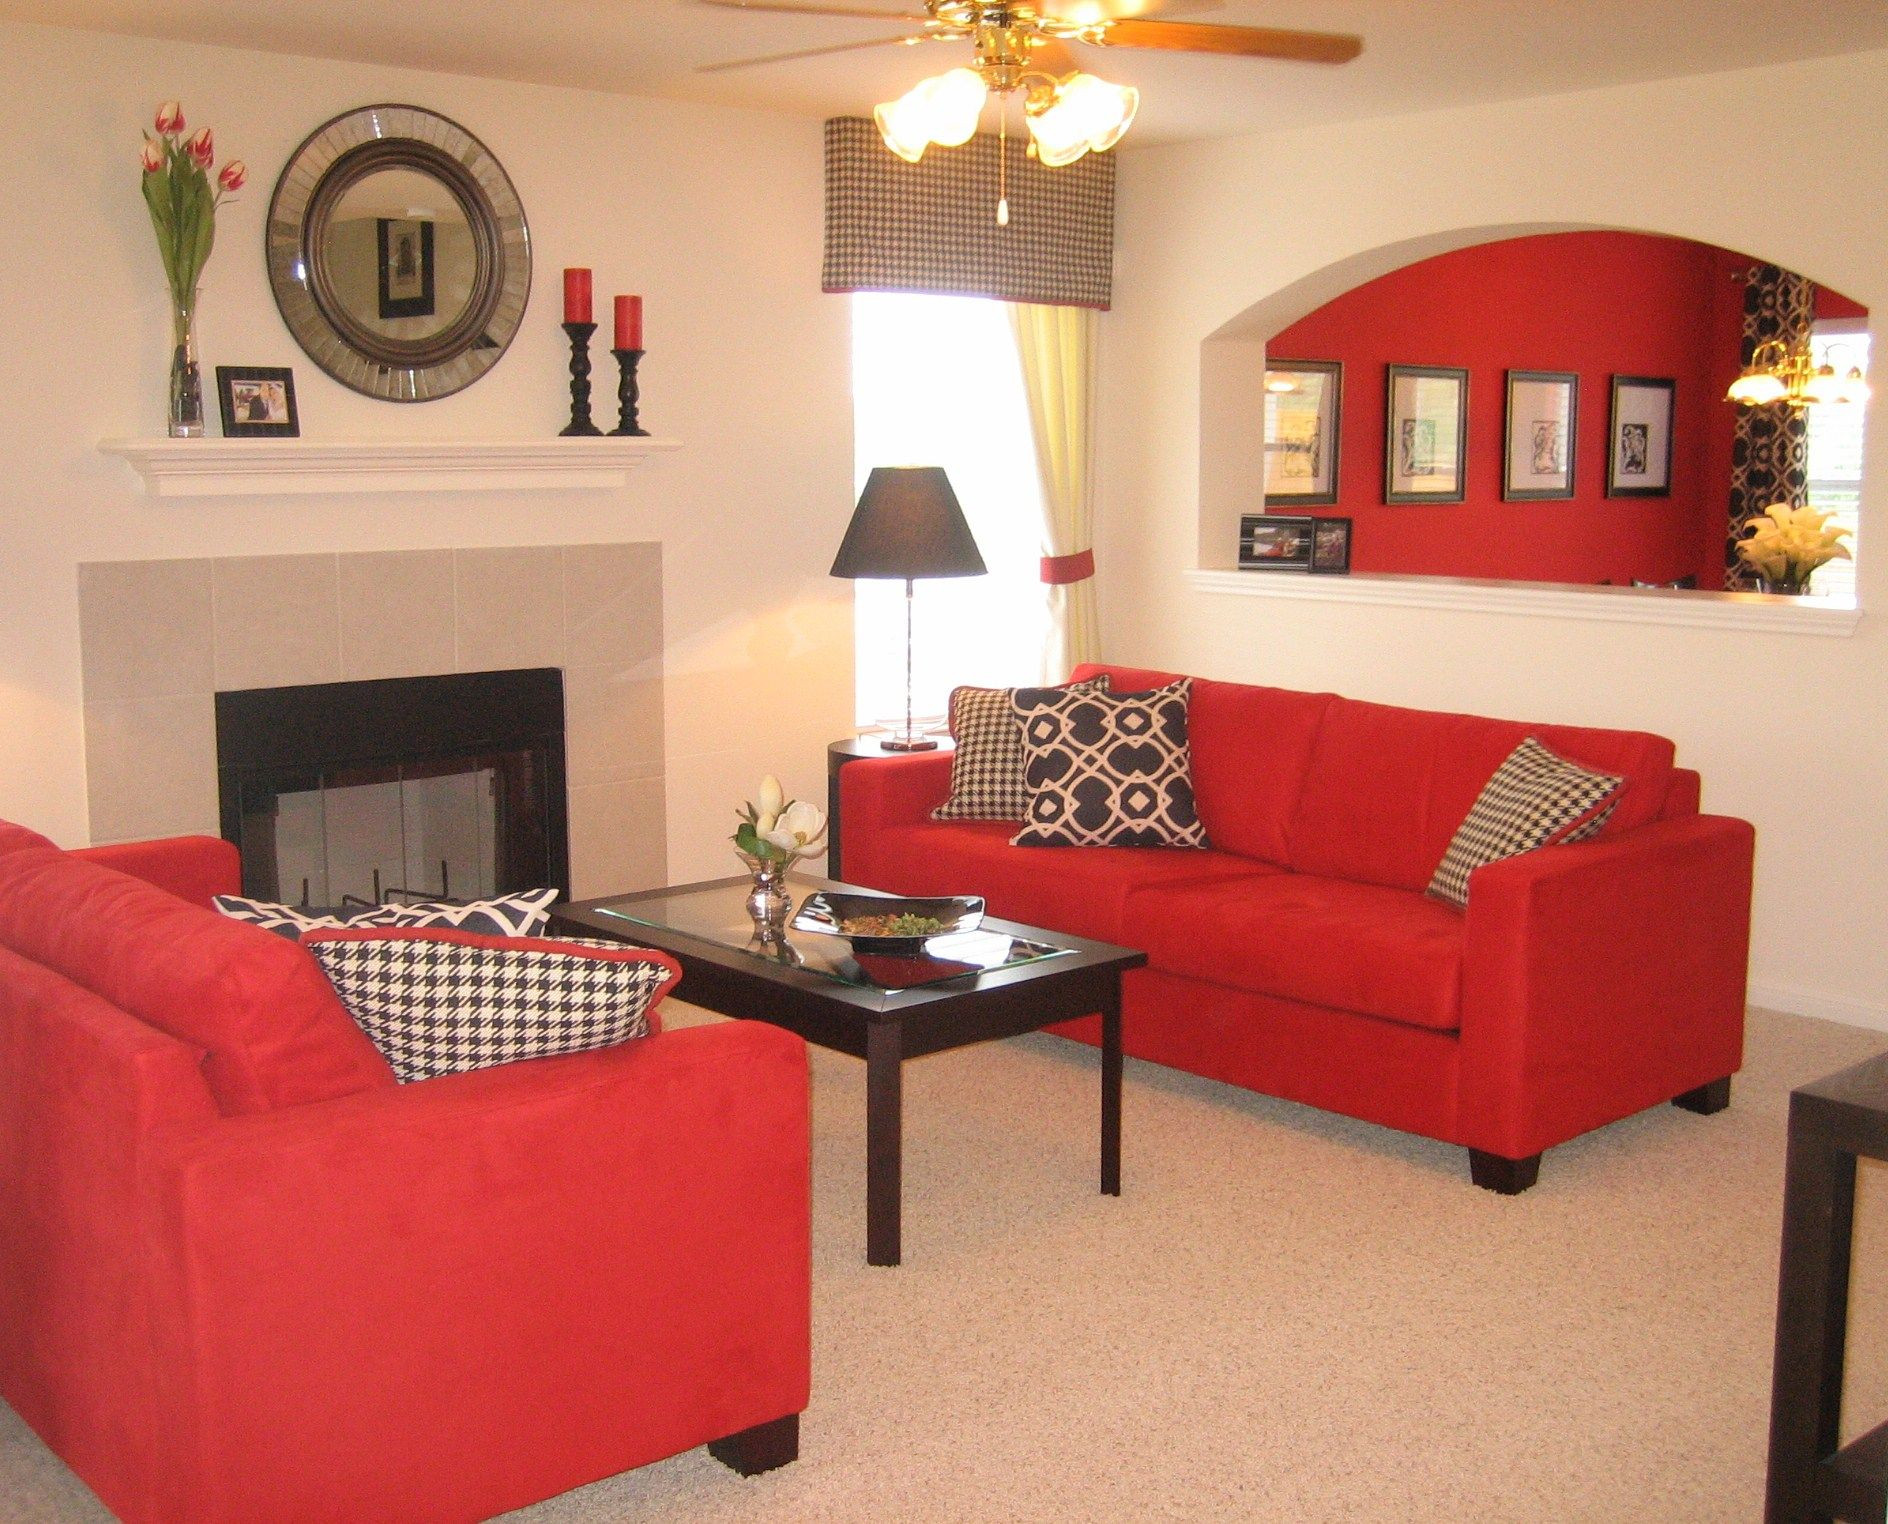 Red Couches Living Room Ideas
 red living room furniture